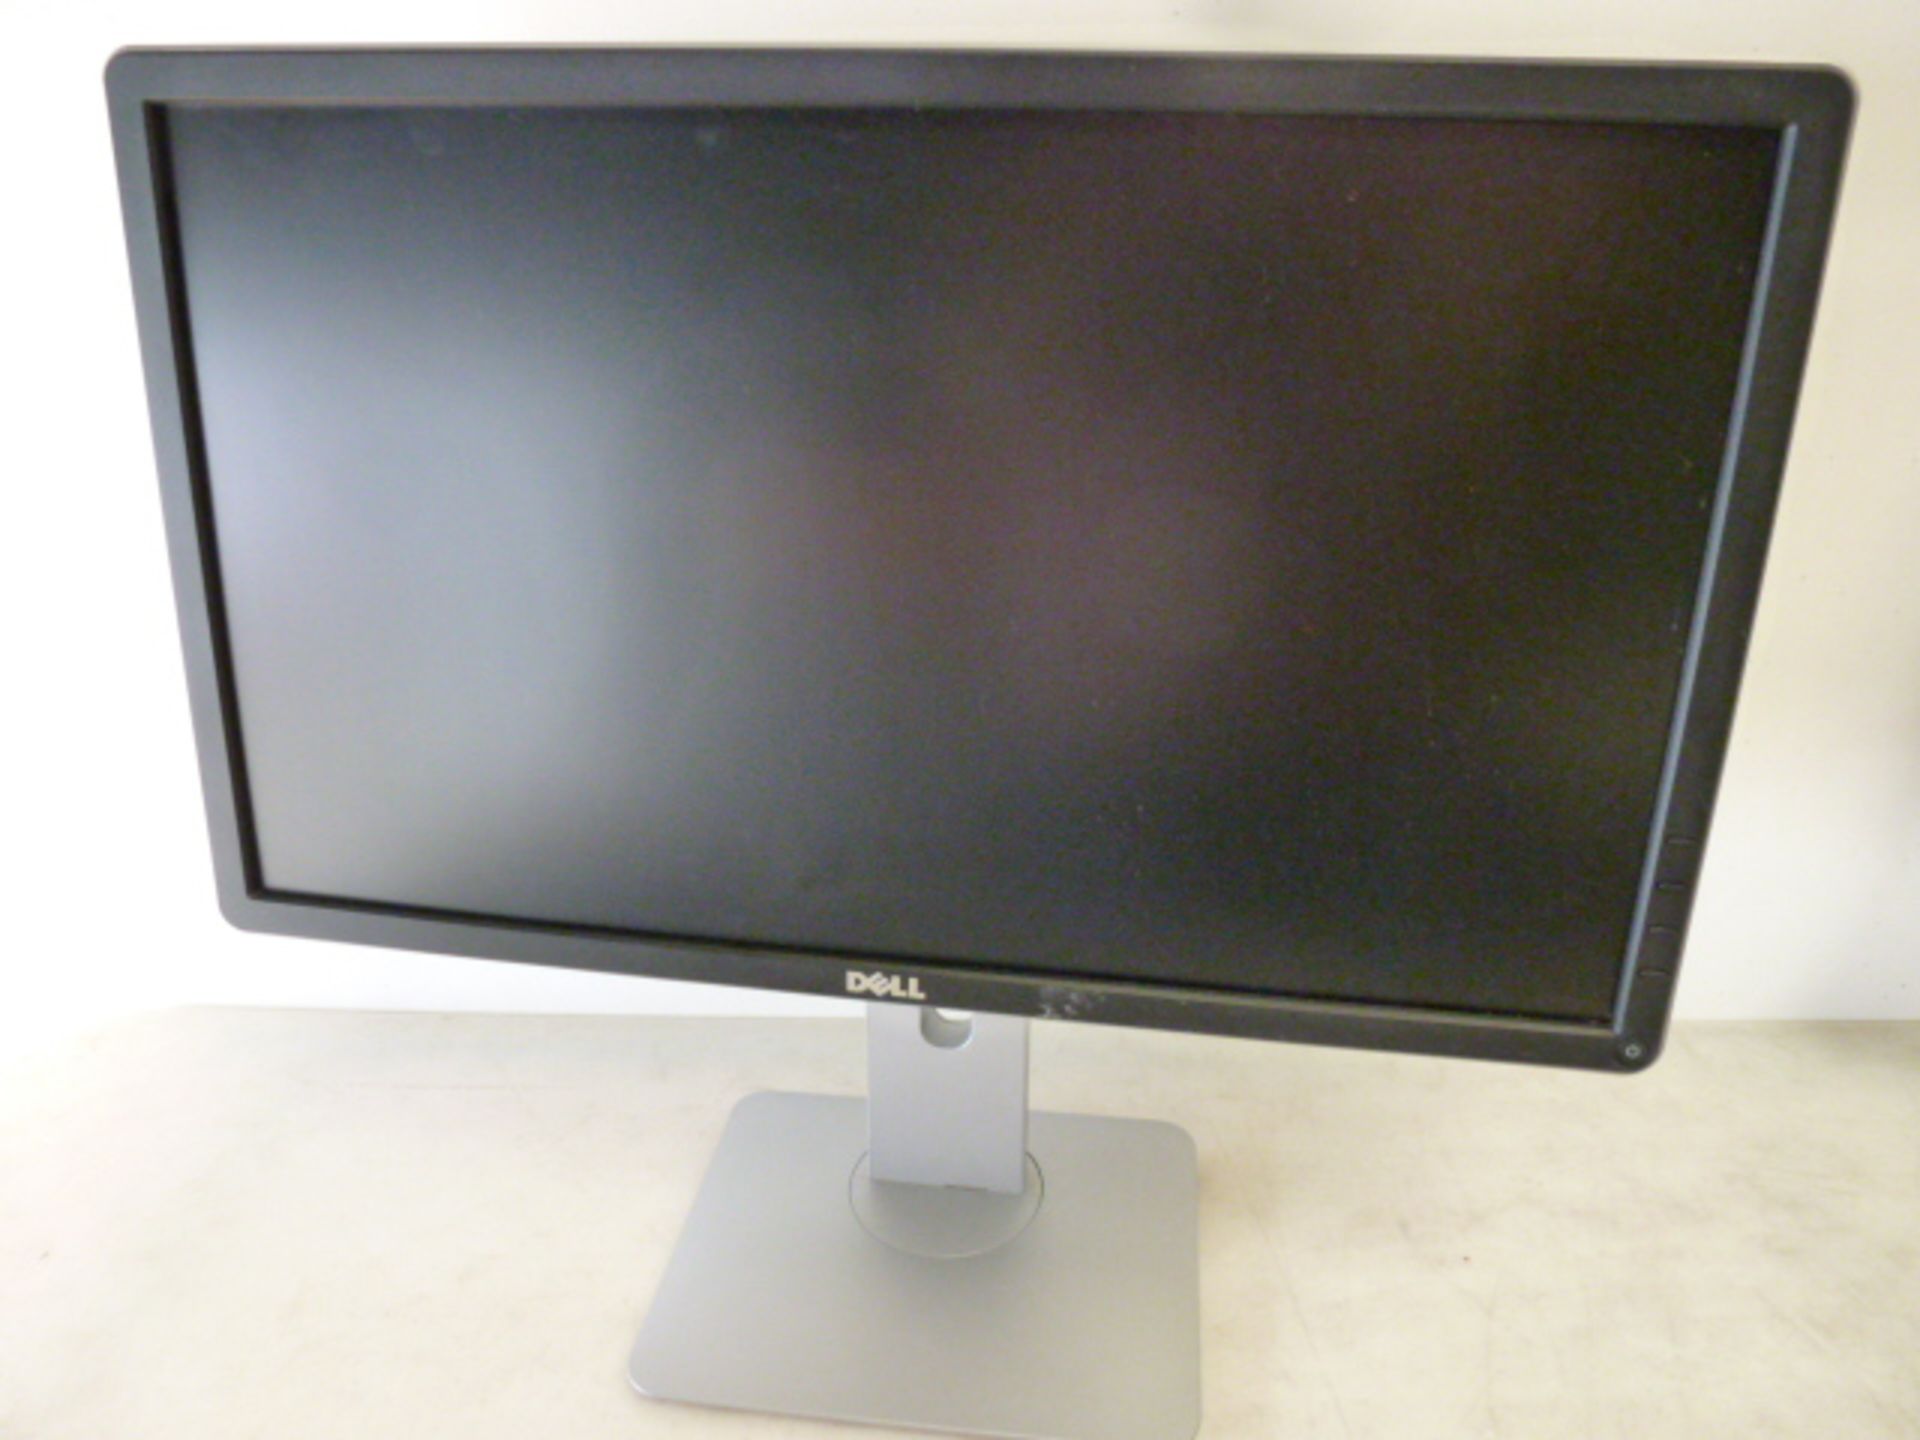 Dell 22" Widescreen LCD Monitor Model P2214Hb. Comes with Power Supply & VGA